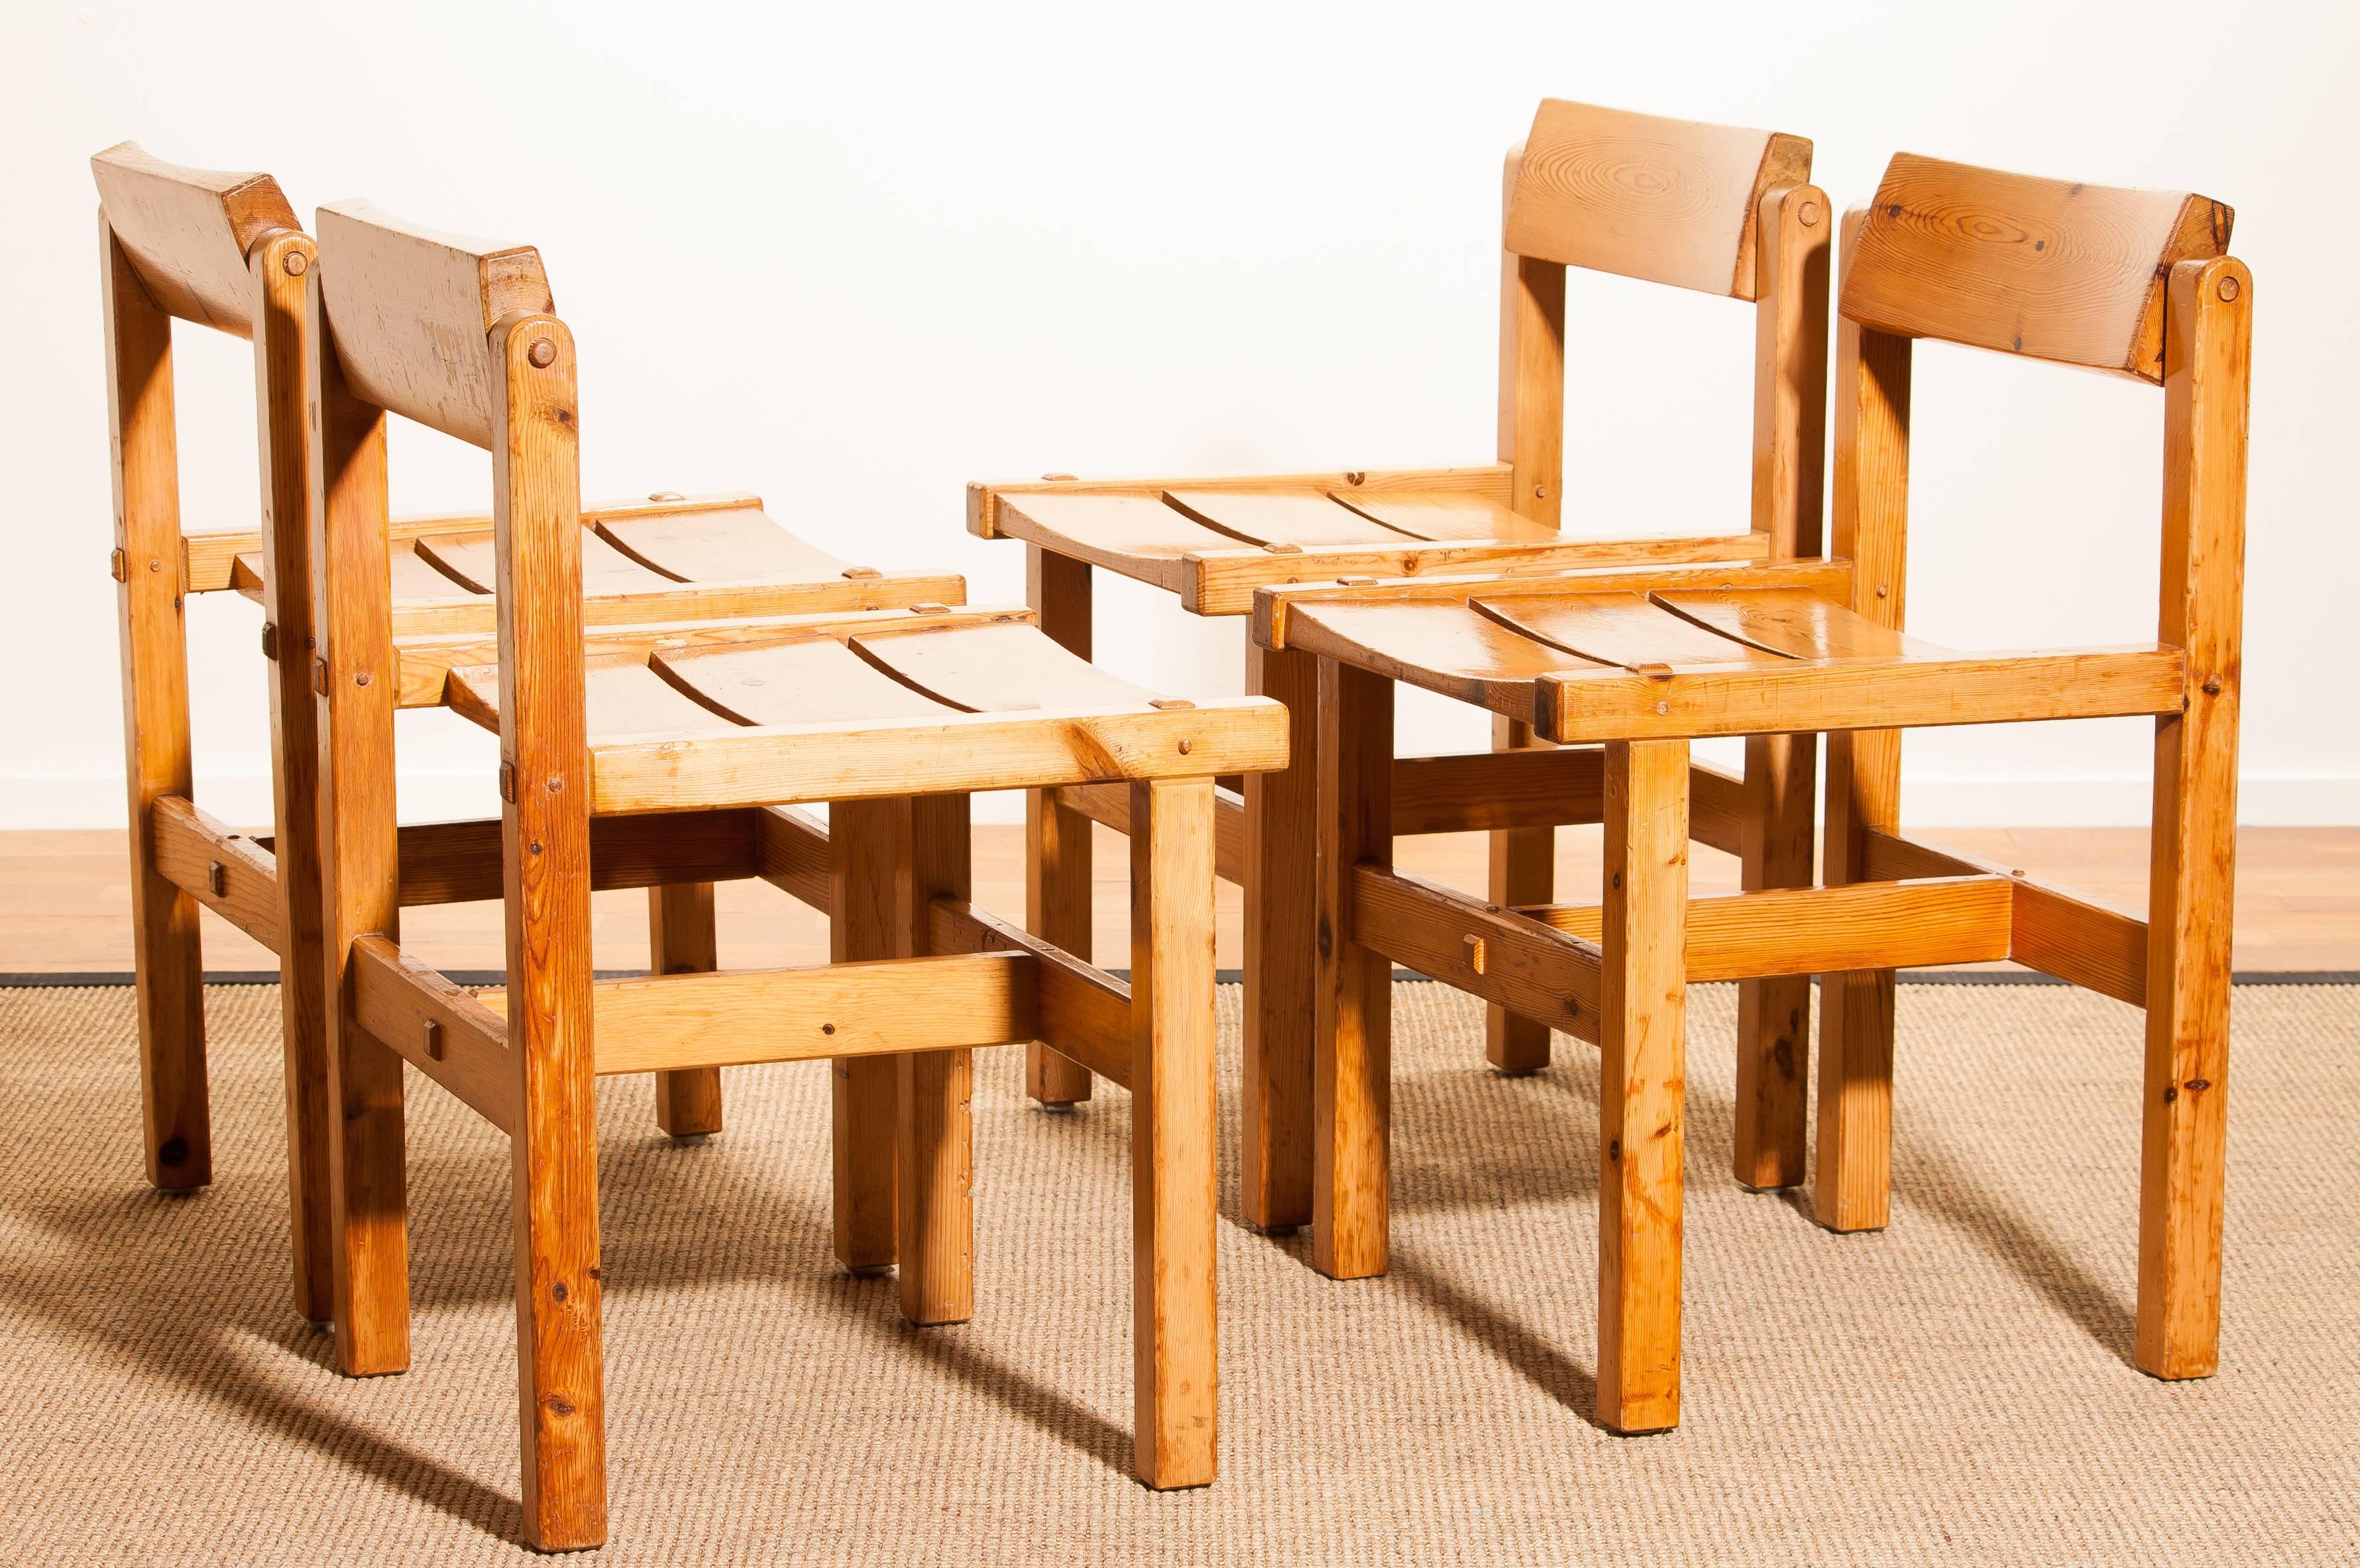 Very nice set of four chairs designed by Edvin Helseth.
These chairs are made of pine and they have turnable backrests.
They are in a beautiful used condition.
Period 1960s
Dimensions: H 74 cm, W 47 cm, D 41 cm, SH 47 cm.